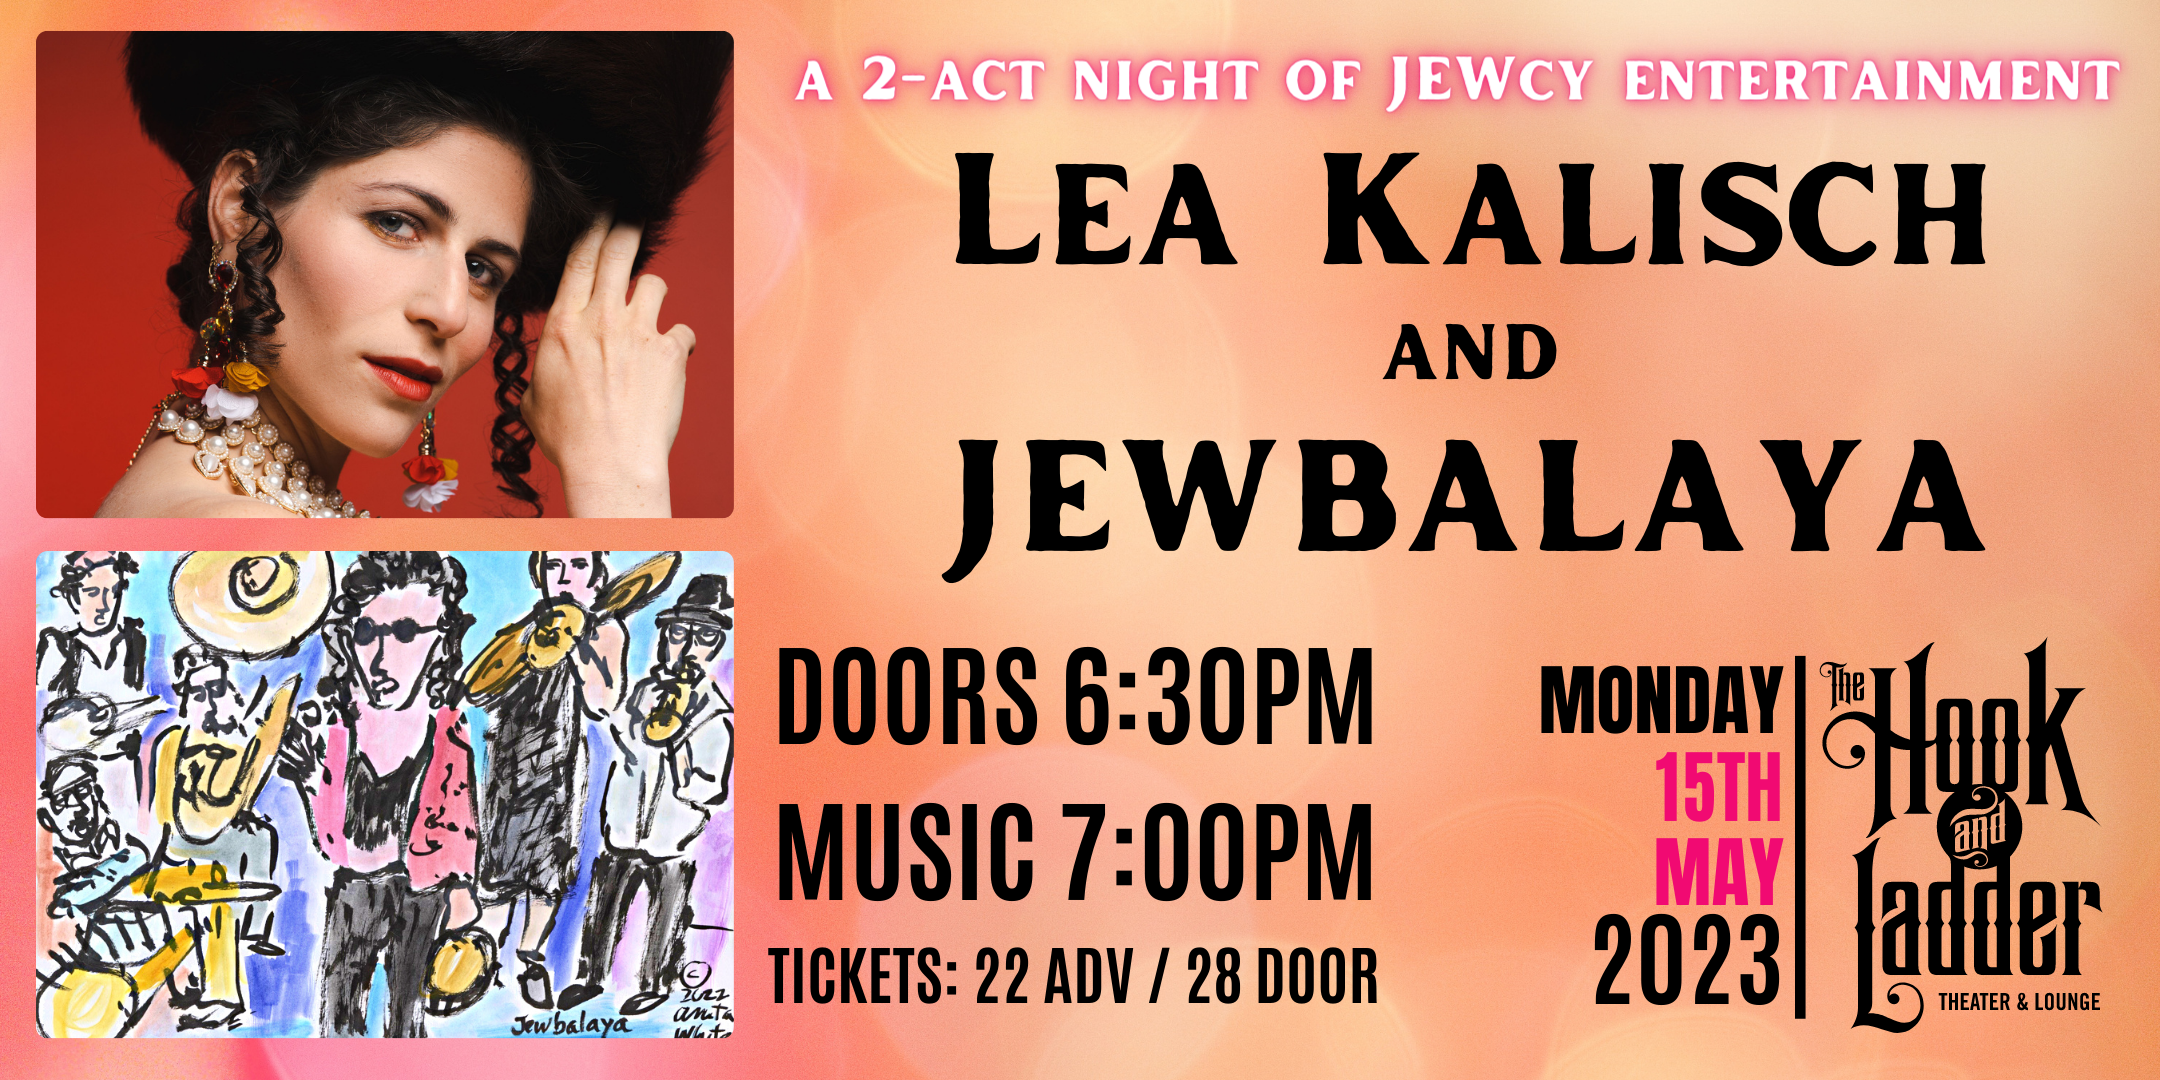 Lea Kalisch & Jewbalaya in Concert Monday, May 15th The Hook and Ladder Theater Doors 6:30pm :: Music 7:00pm General Admission $22 ADV / $28 DOS :: 21+ NO REFUNDS